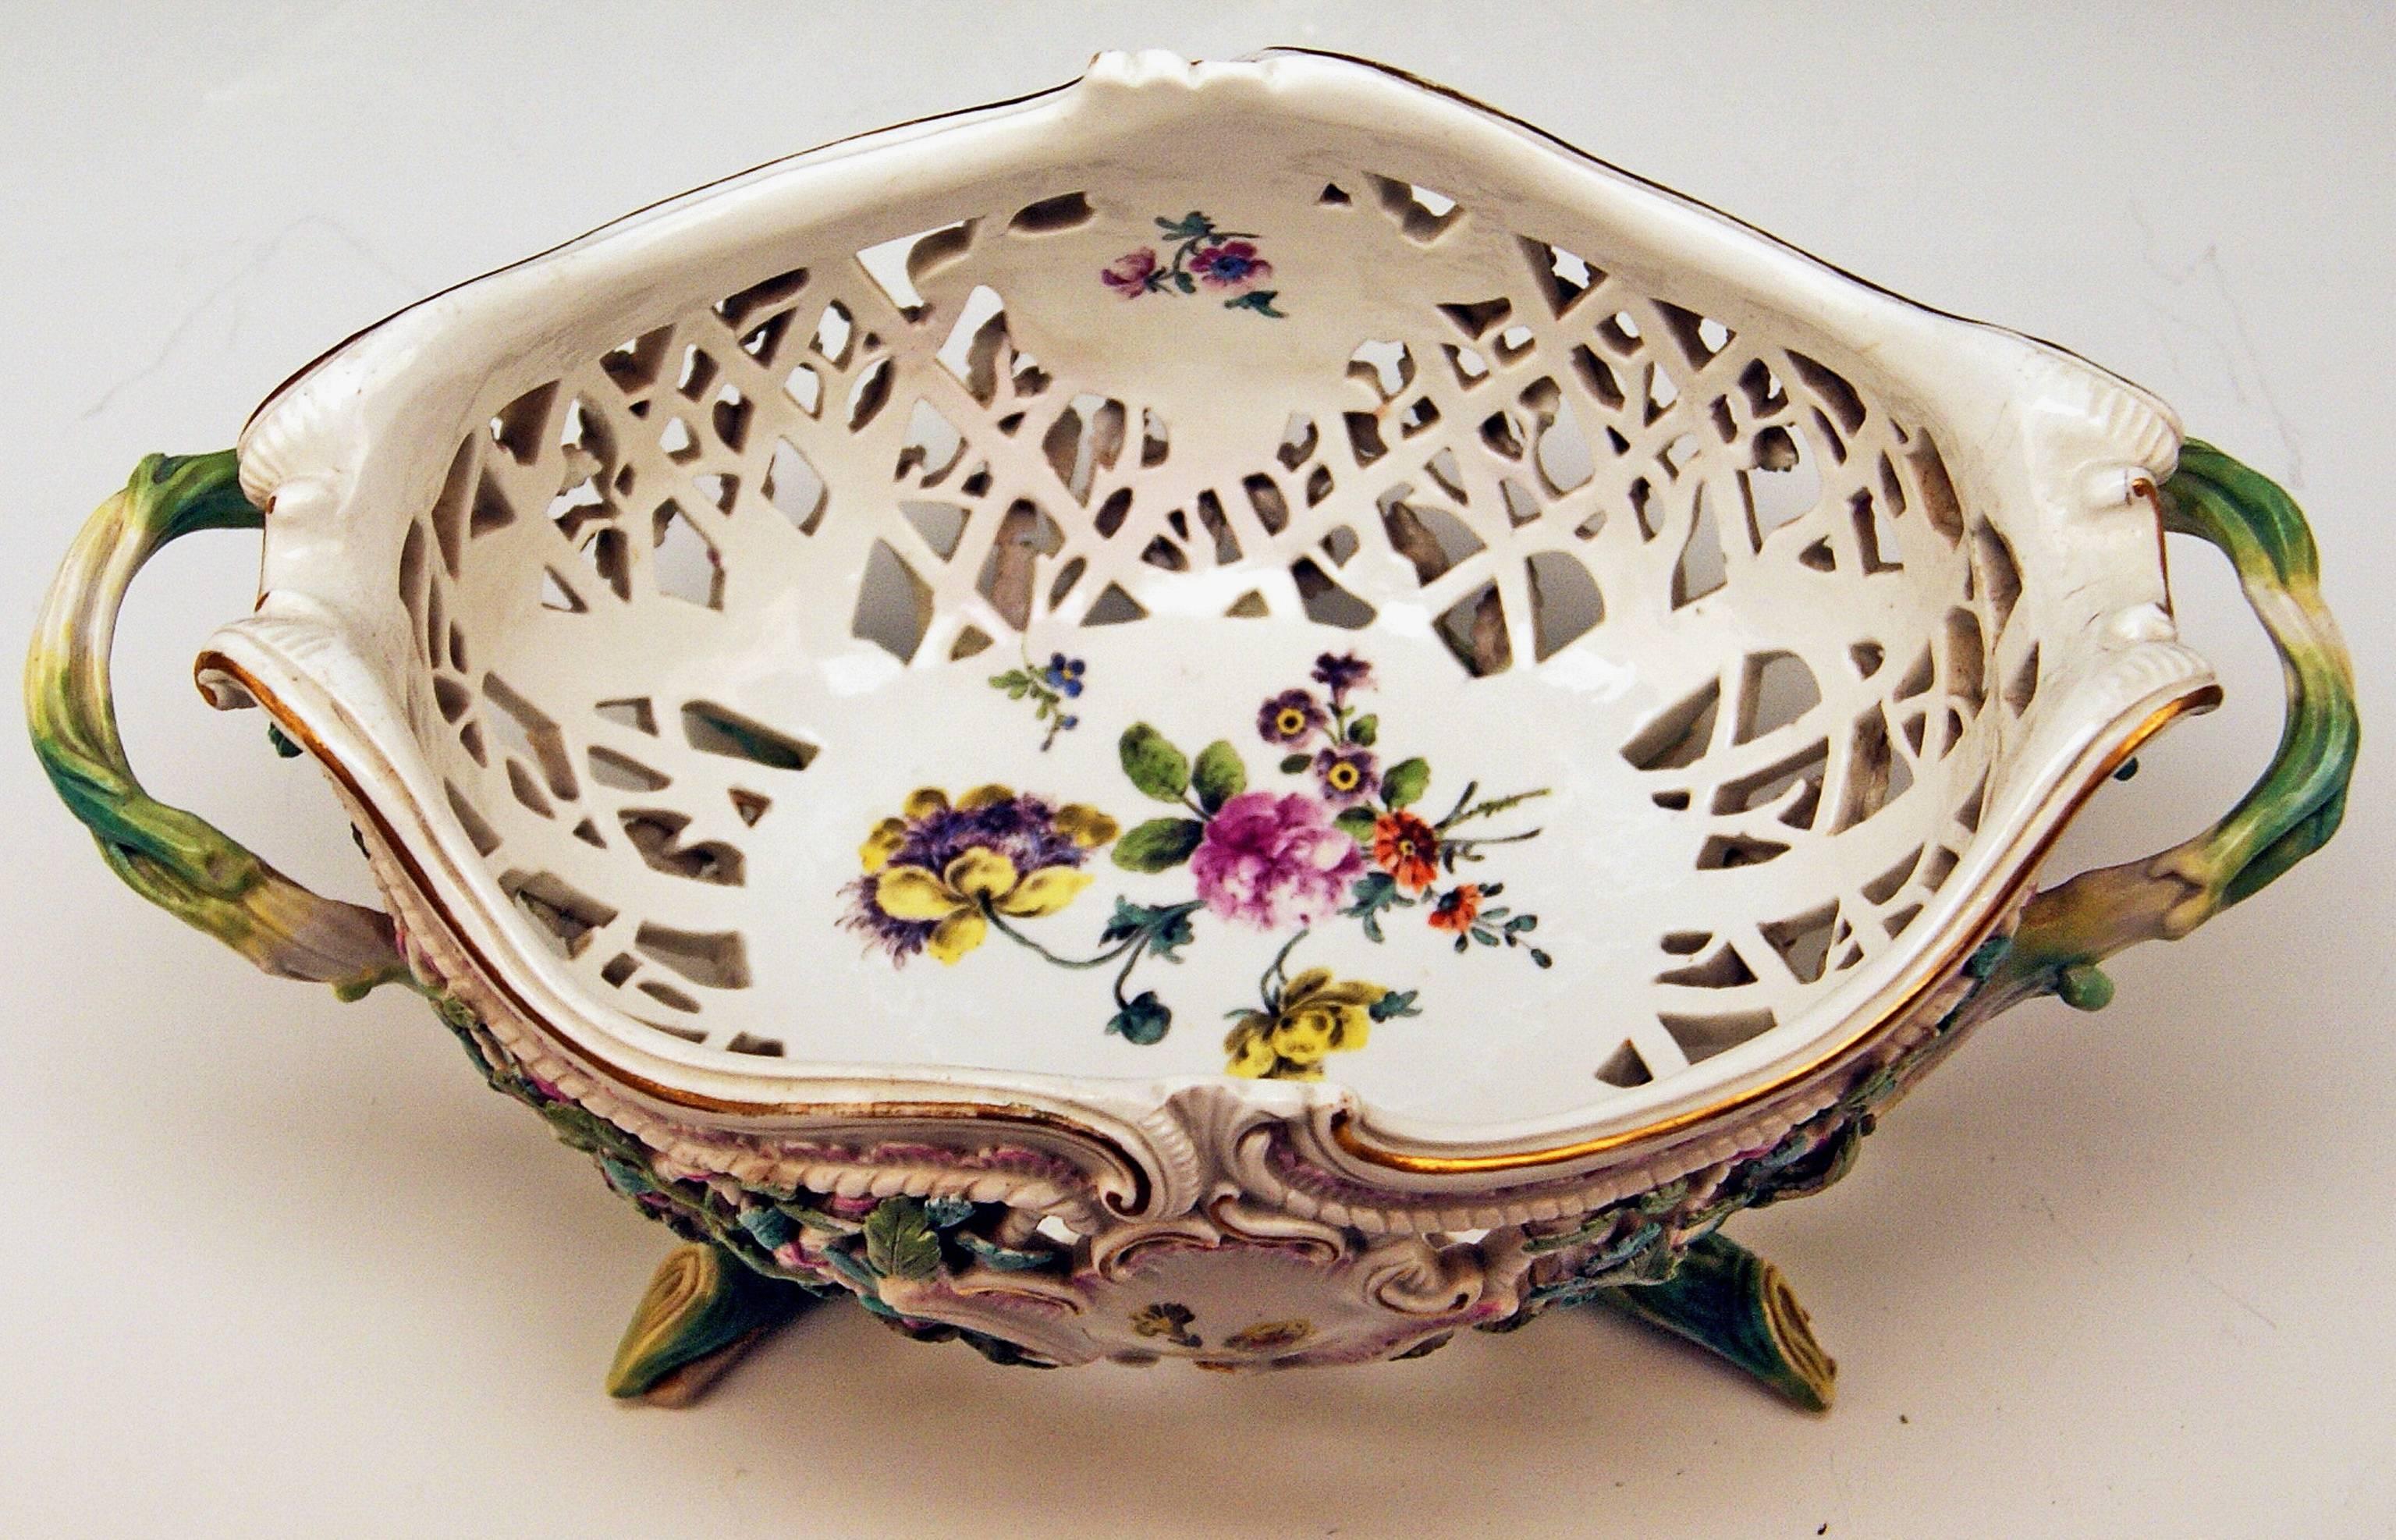 German Meissen Rococo Large Oval Reticulated Basket Bowl with Flowers, circa 1763-1773